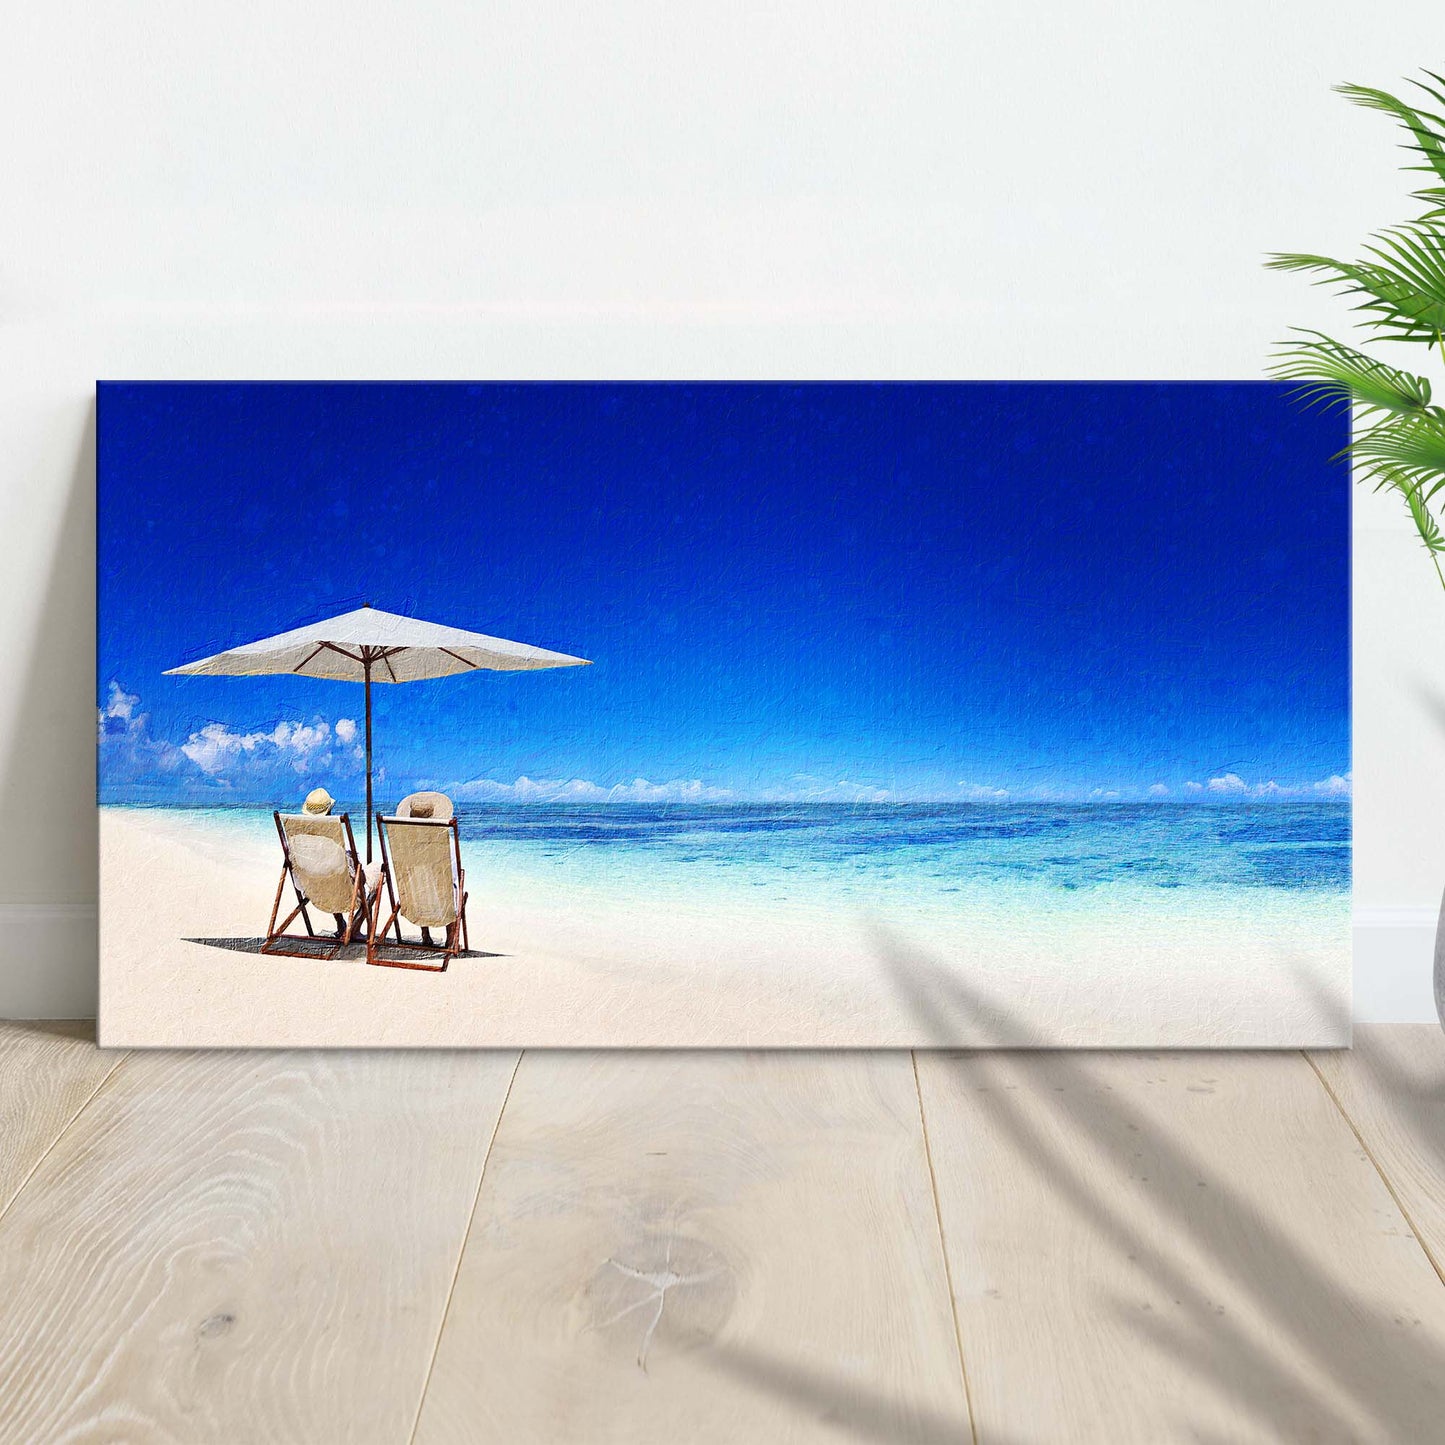 Beach Chairs On The White Sand Canvas Wall Art - Image by Tailored Canvases